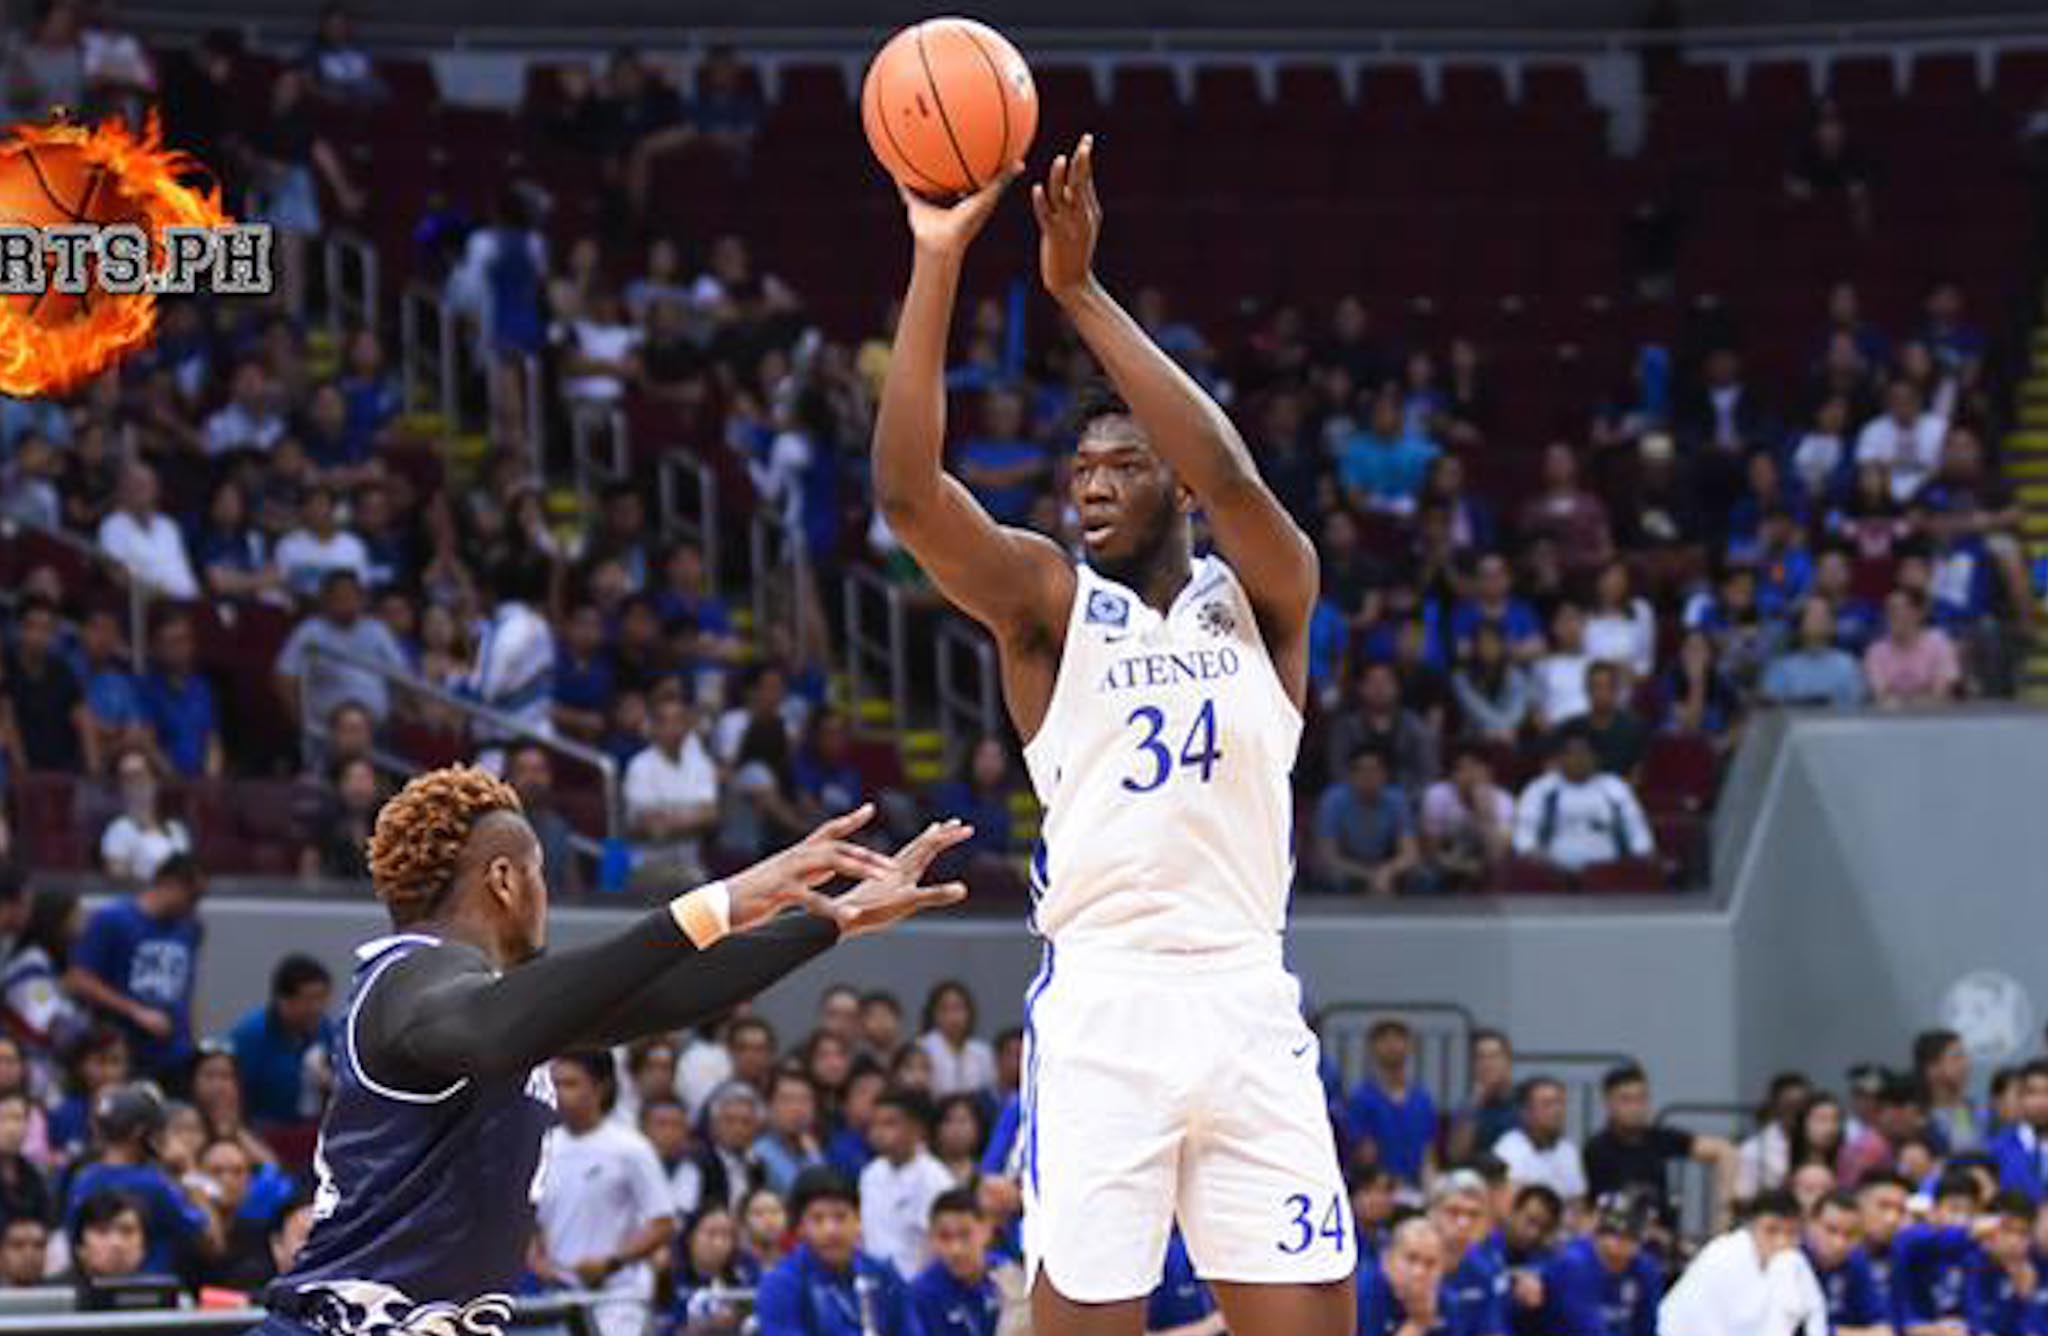 Ateneo ends elimination with a convincing win over UST